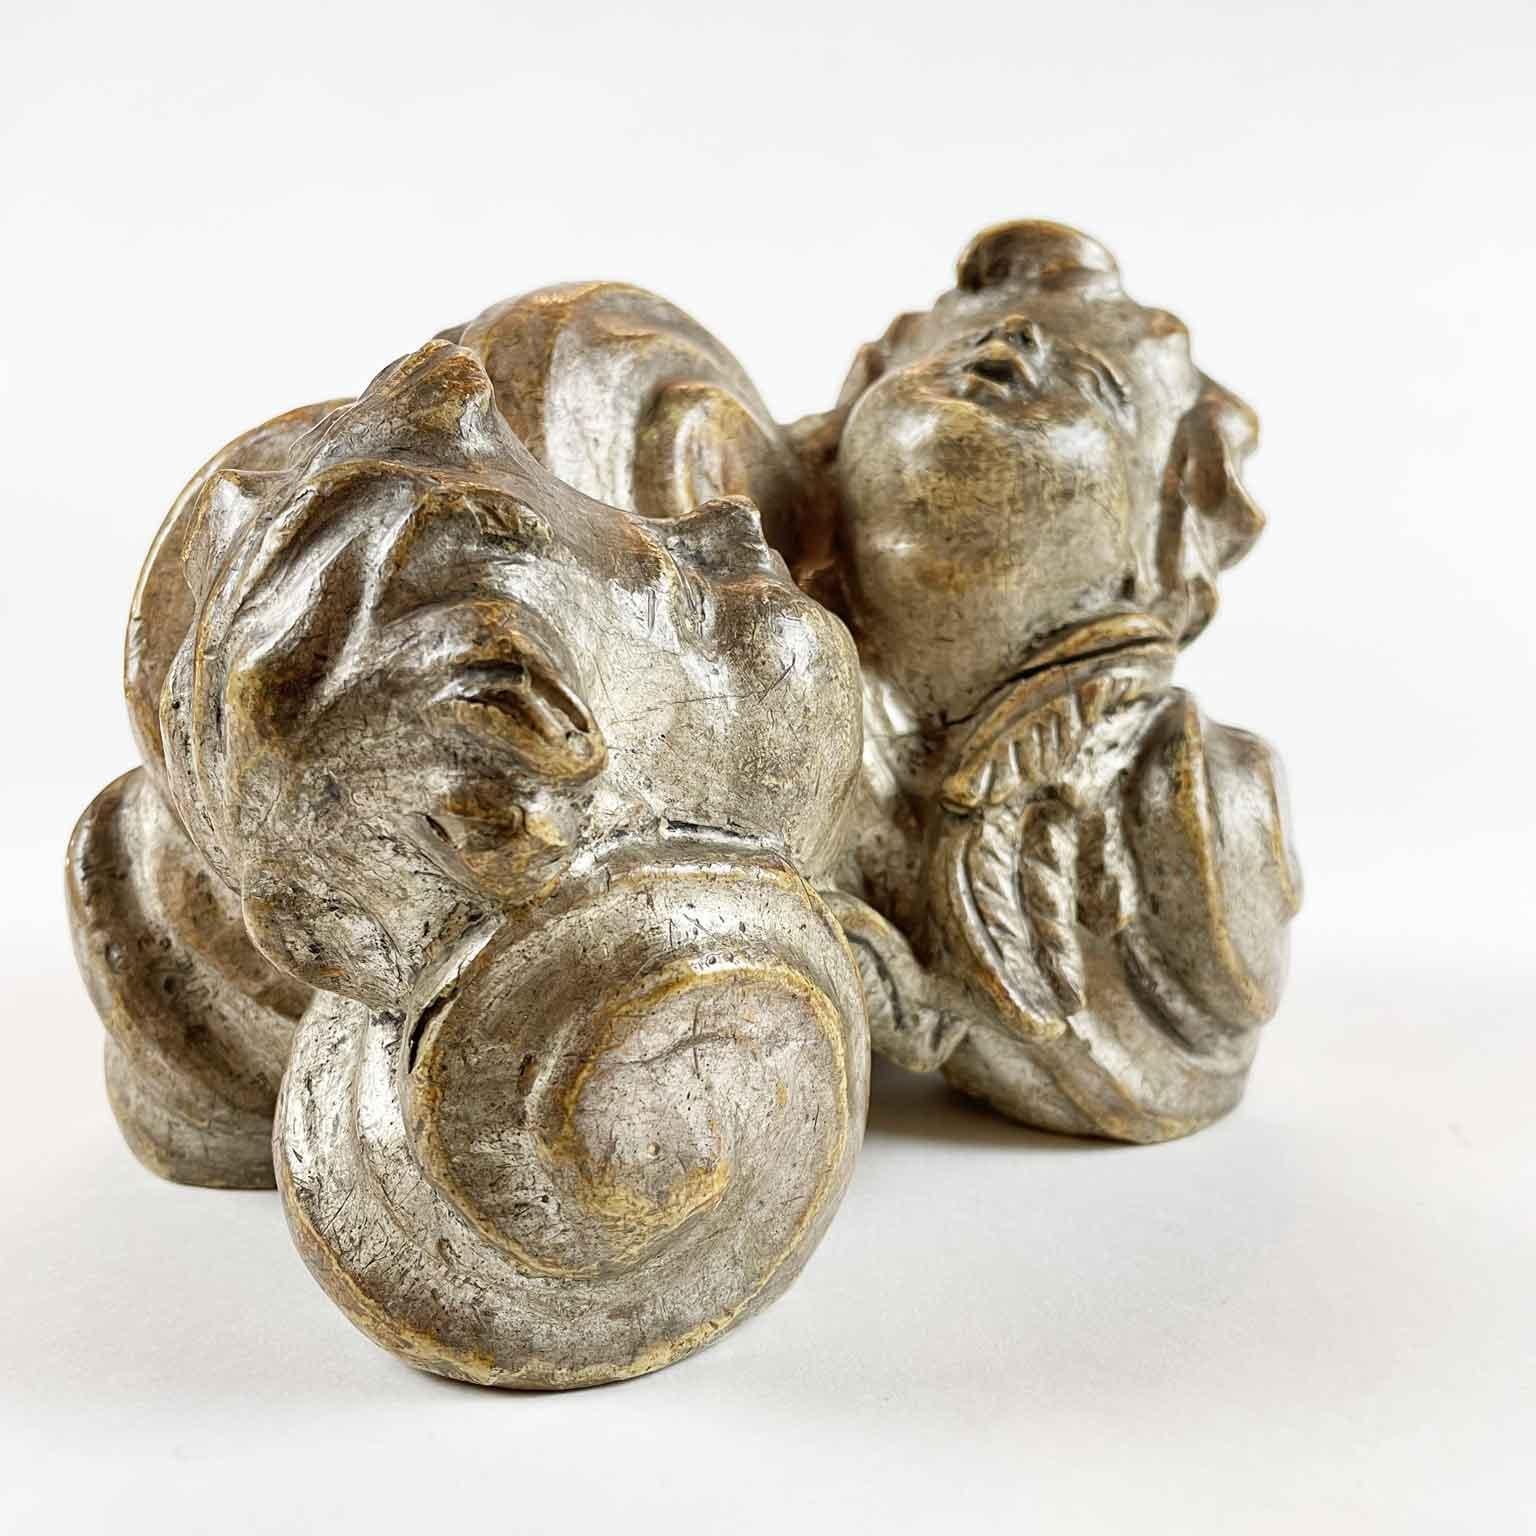 Antique Italian hand-carved and silvered base with cherubs dating back to the second half of 18th century, in good age related condition.

It is a cloud-shaped wooden base with scrolling carving, topped by two heads of winged Cherubs looking